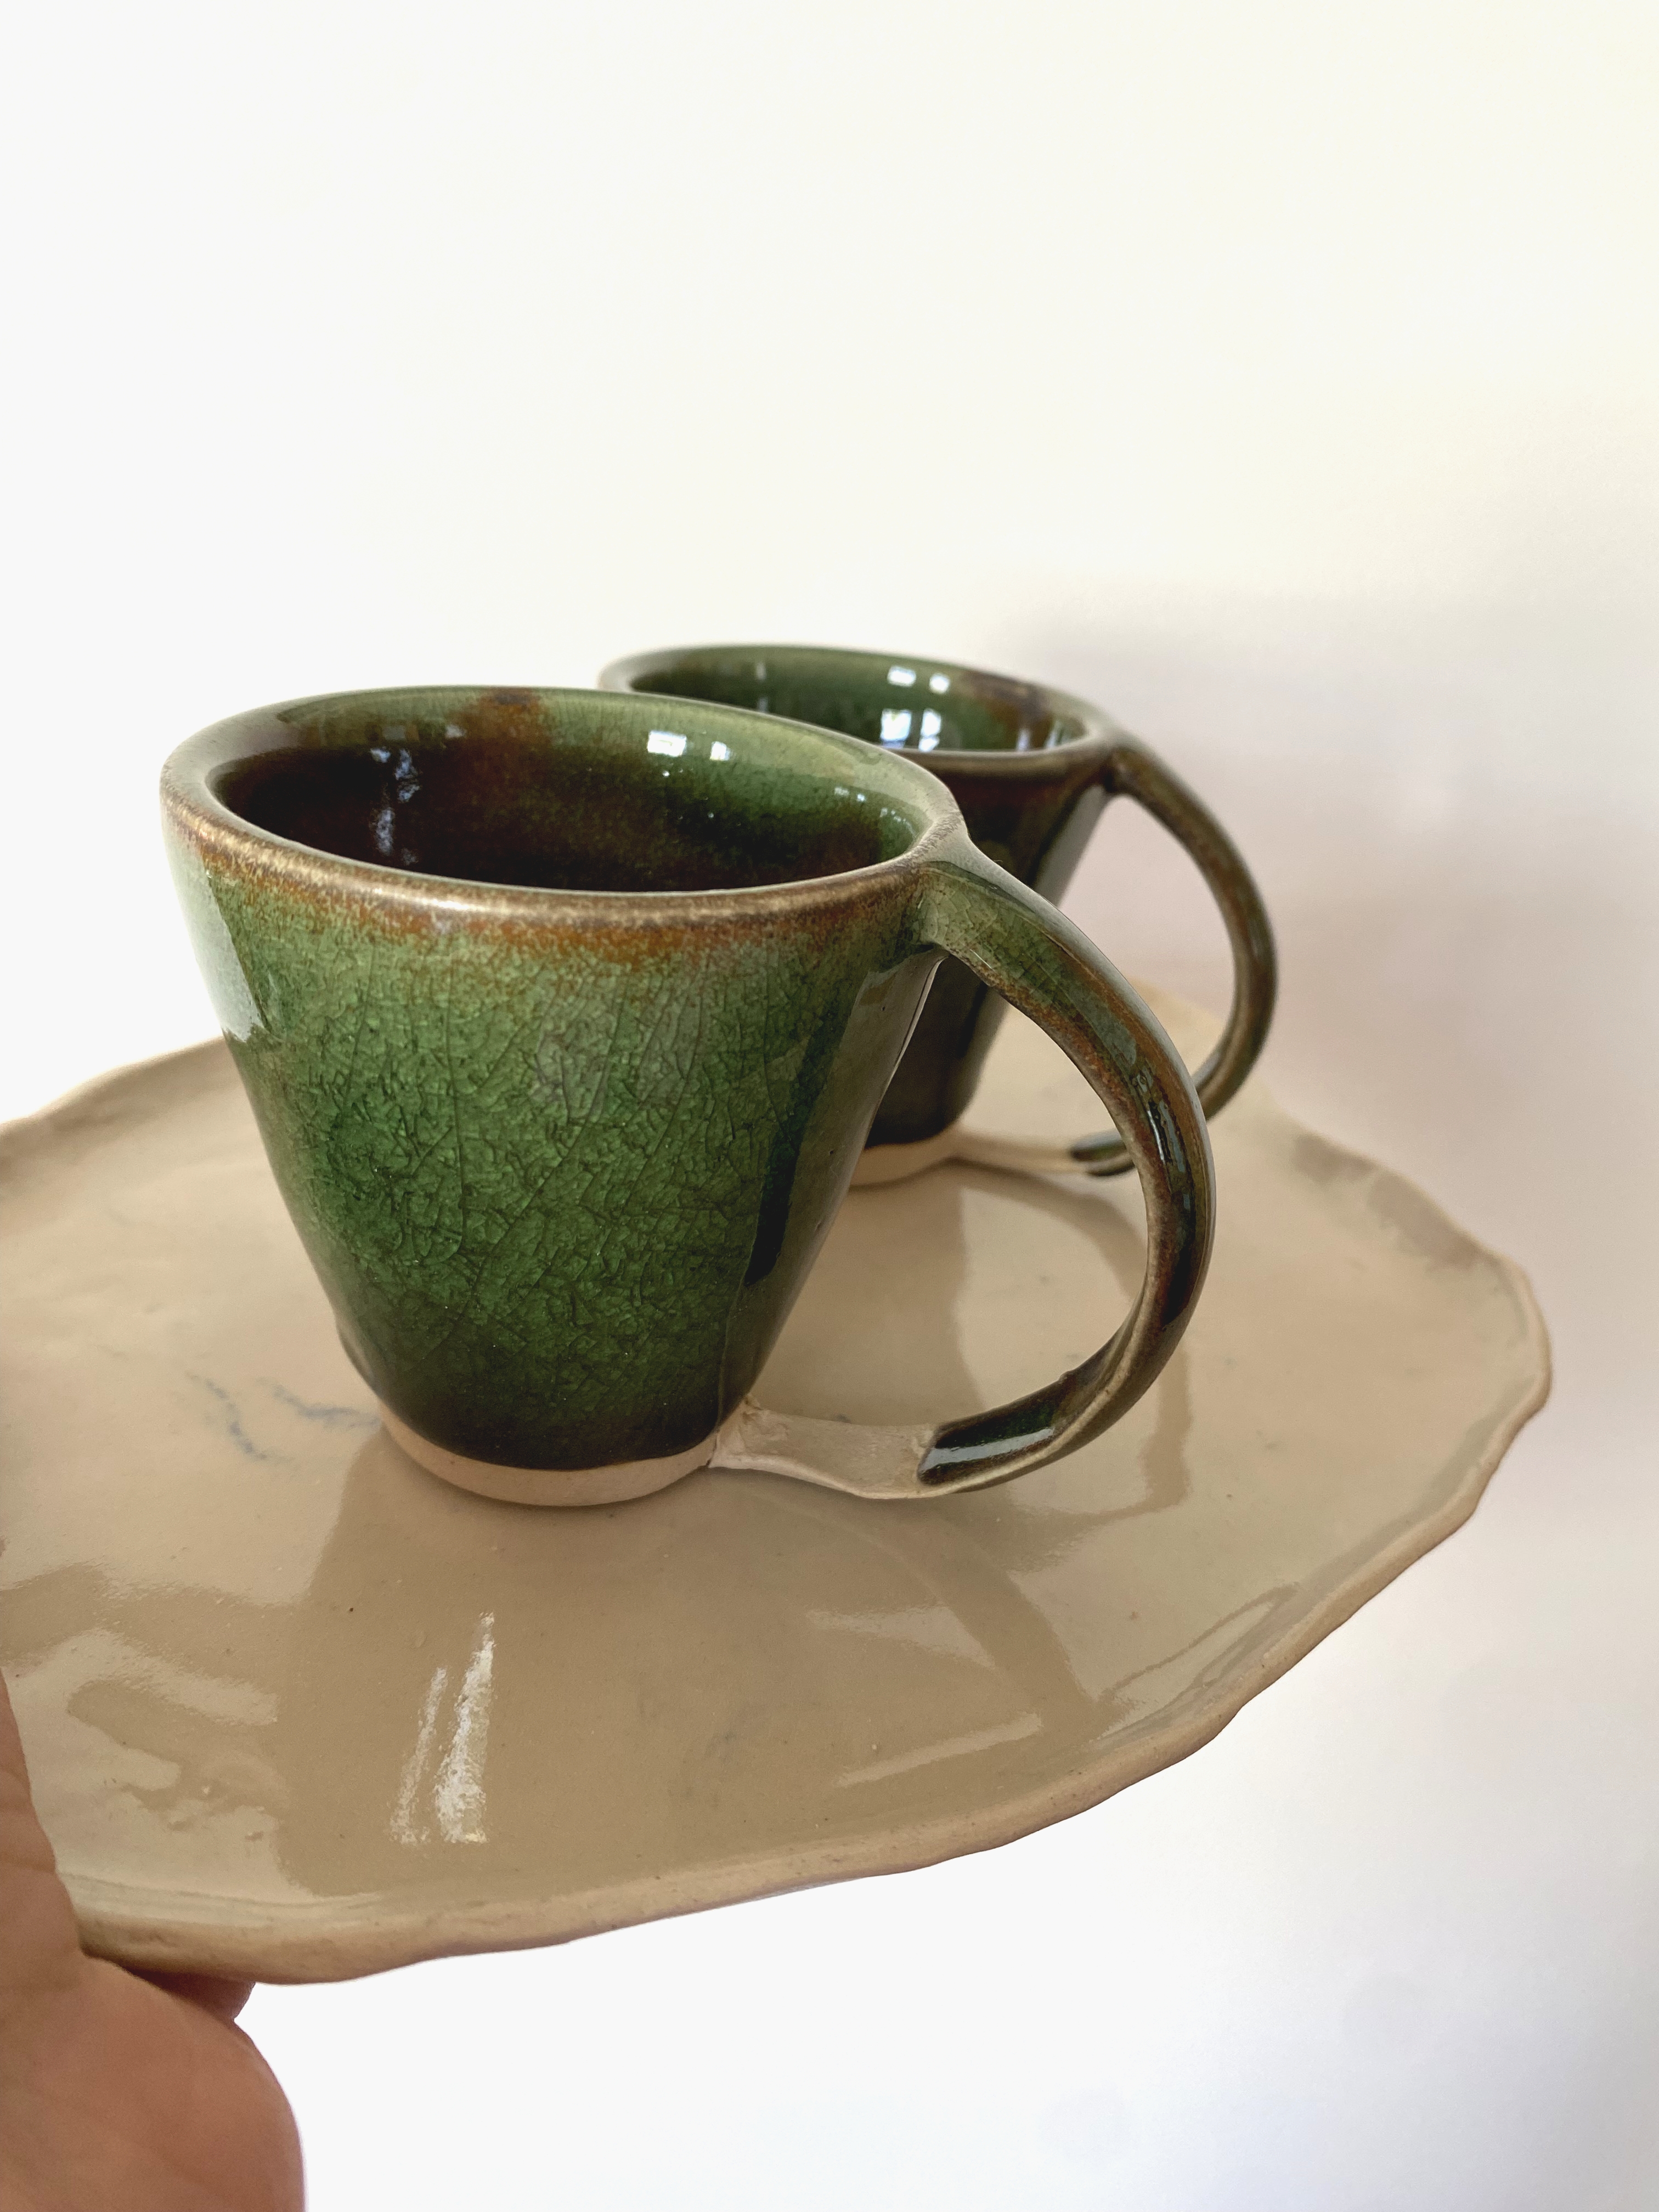 Set of 2 espresso cups (platter not include; available to purchase separately by request)